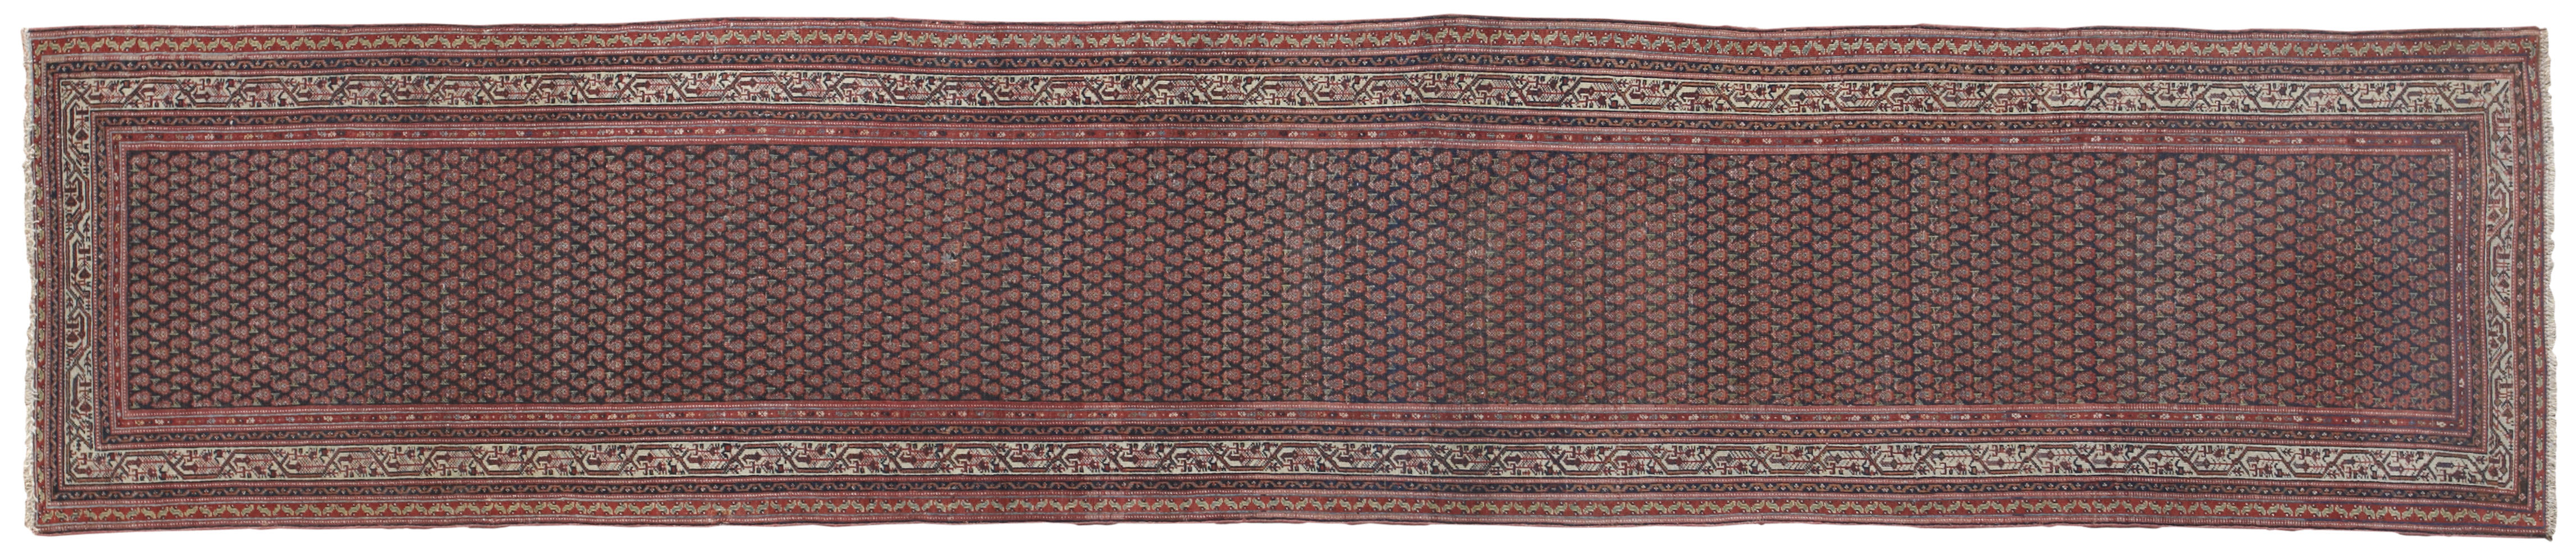 A Seraband runner size approximately 12919f